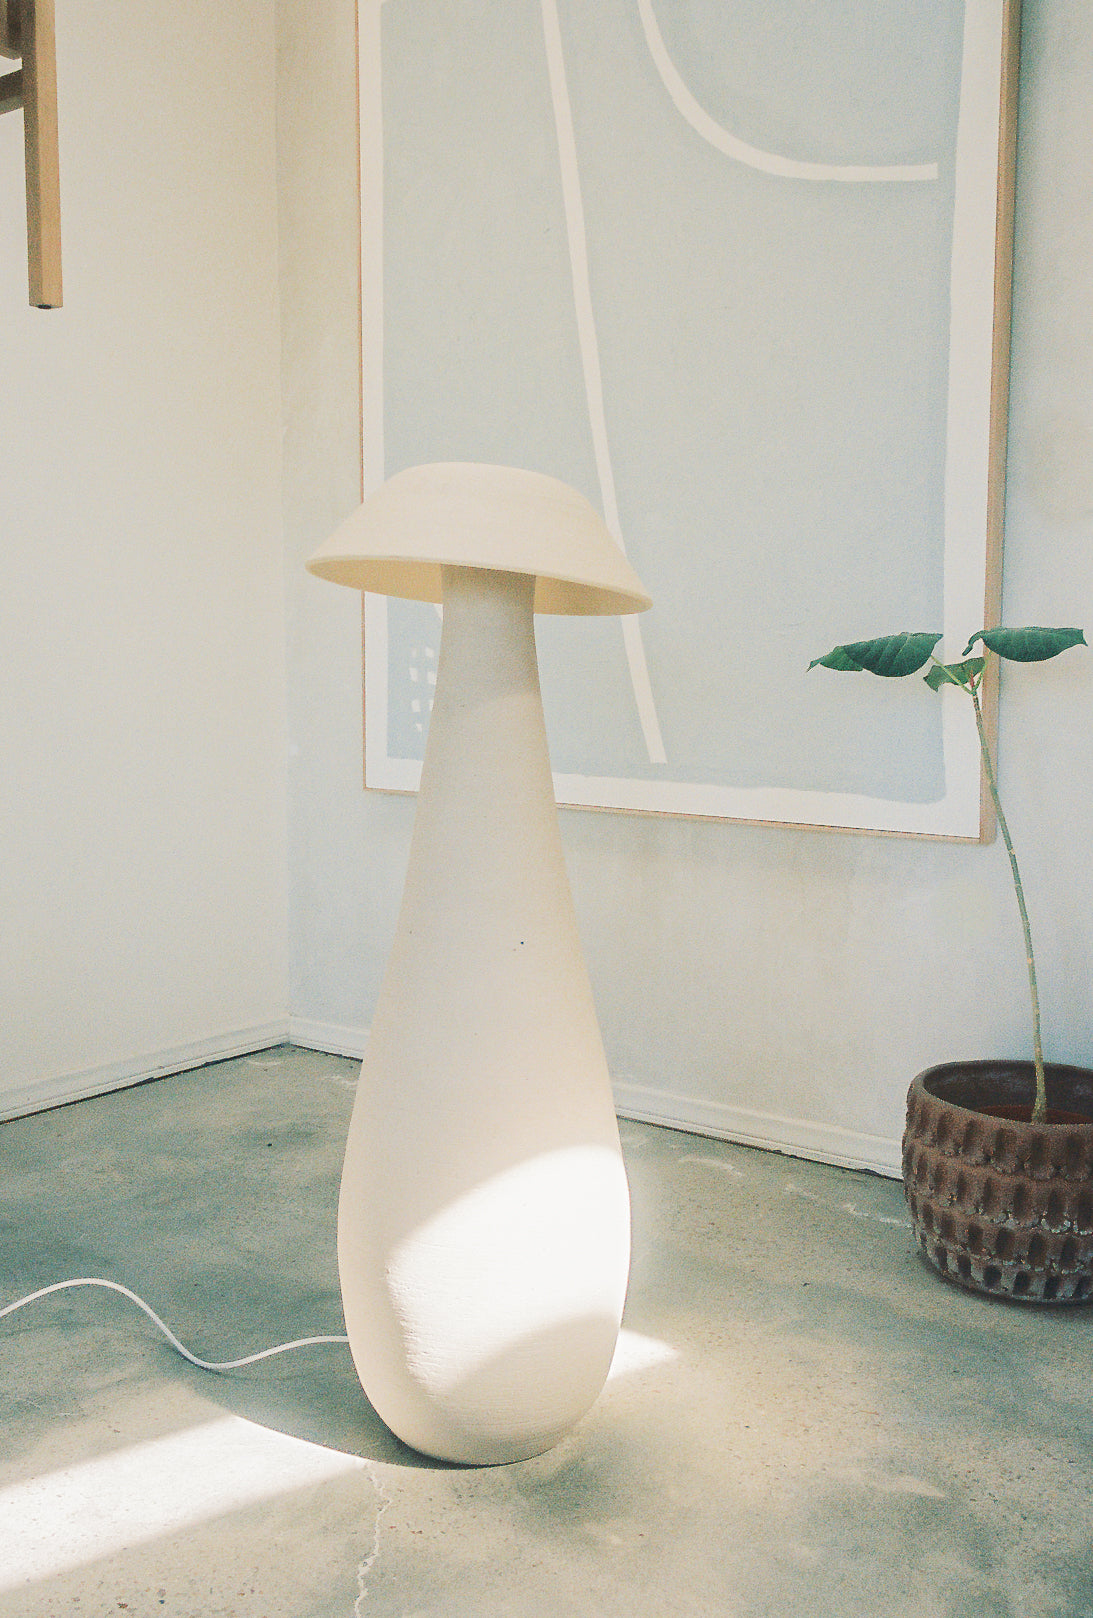 Mushroom Floor Lamp in white in the corner of a naturally lit room next to a potted plant.